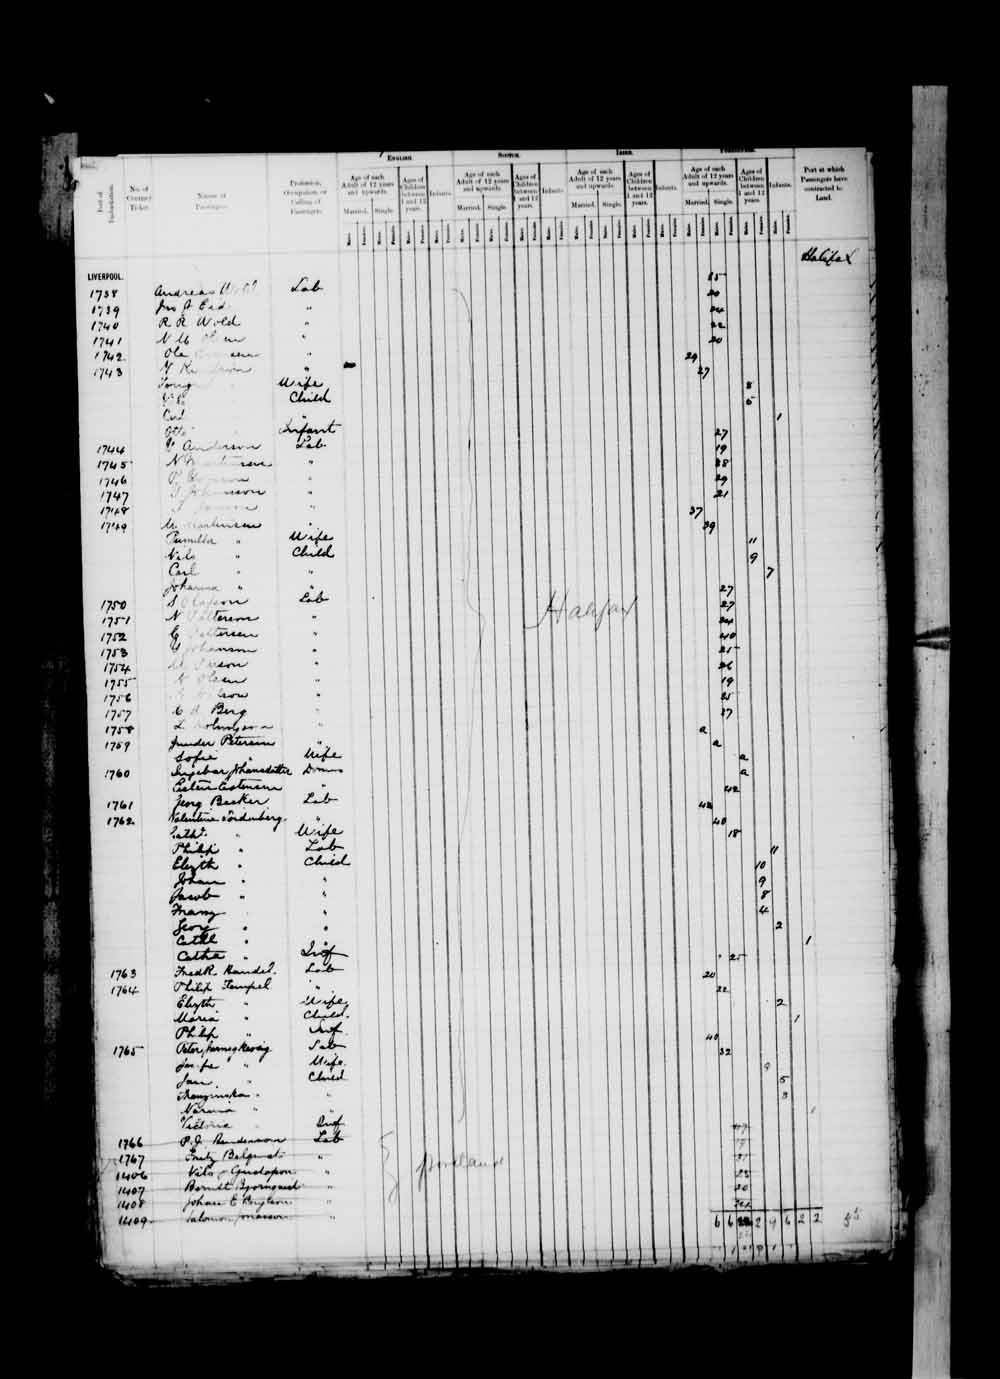 Digitized page of Passenger Lists for Image No.: e003674939